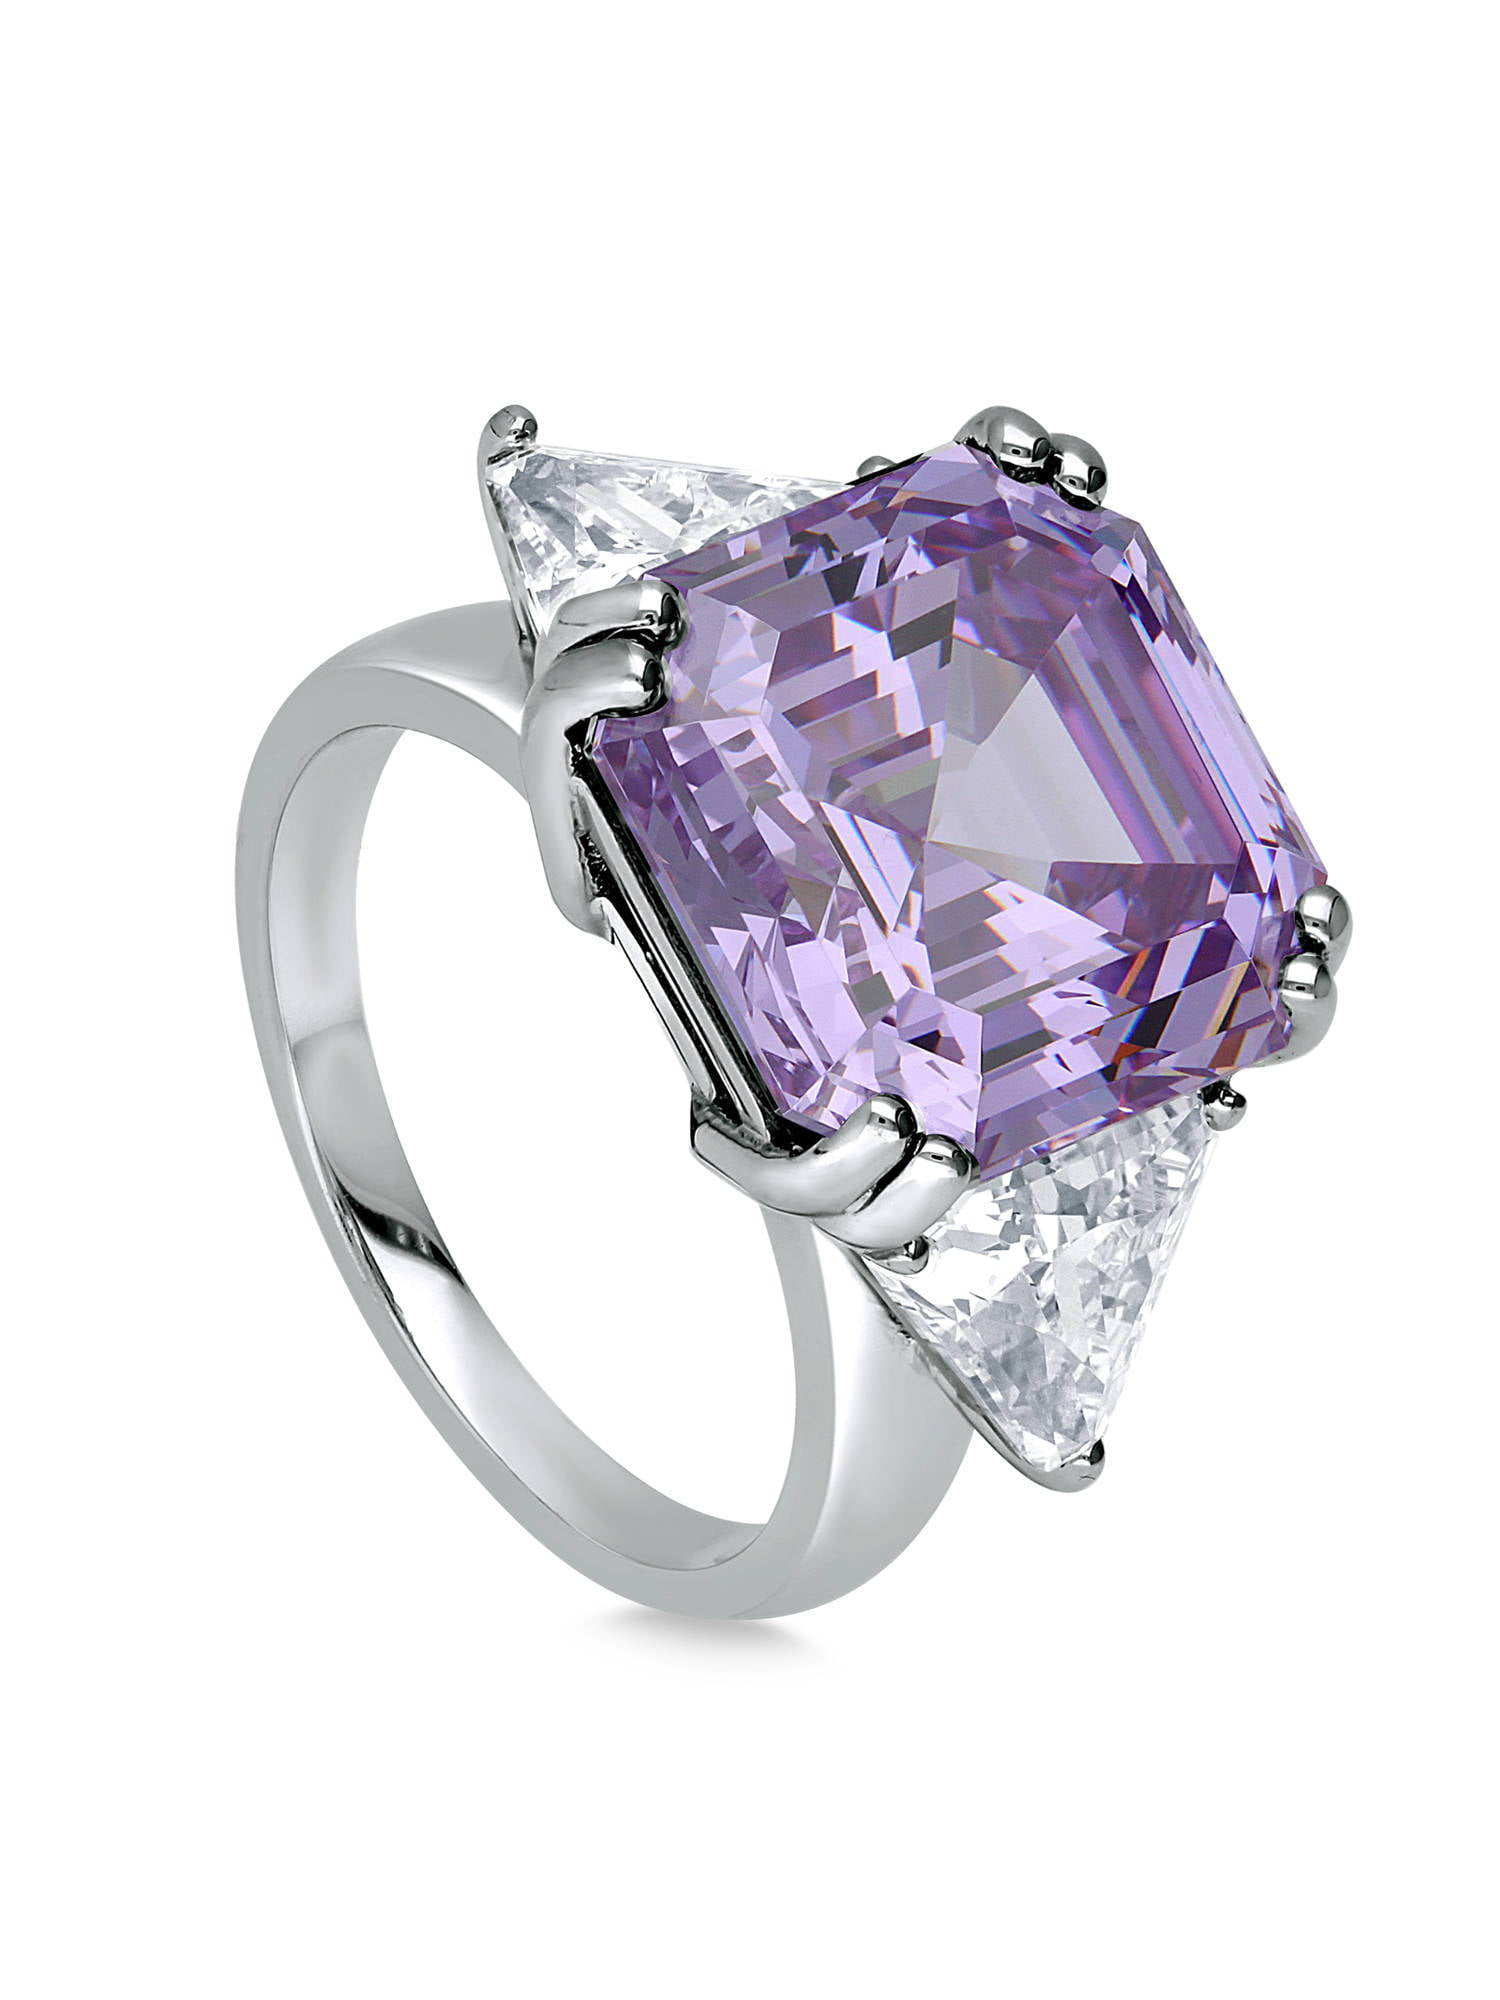 BERRICLE Sterling Silver 3-Stone Purple Asscher Cut Cubic Zirconia CZ  Statement Cocktail Fashion Anniversary Ring for Women, Rhodium Plated Size 9